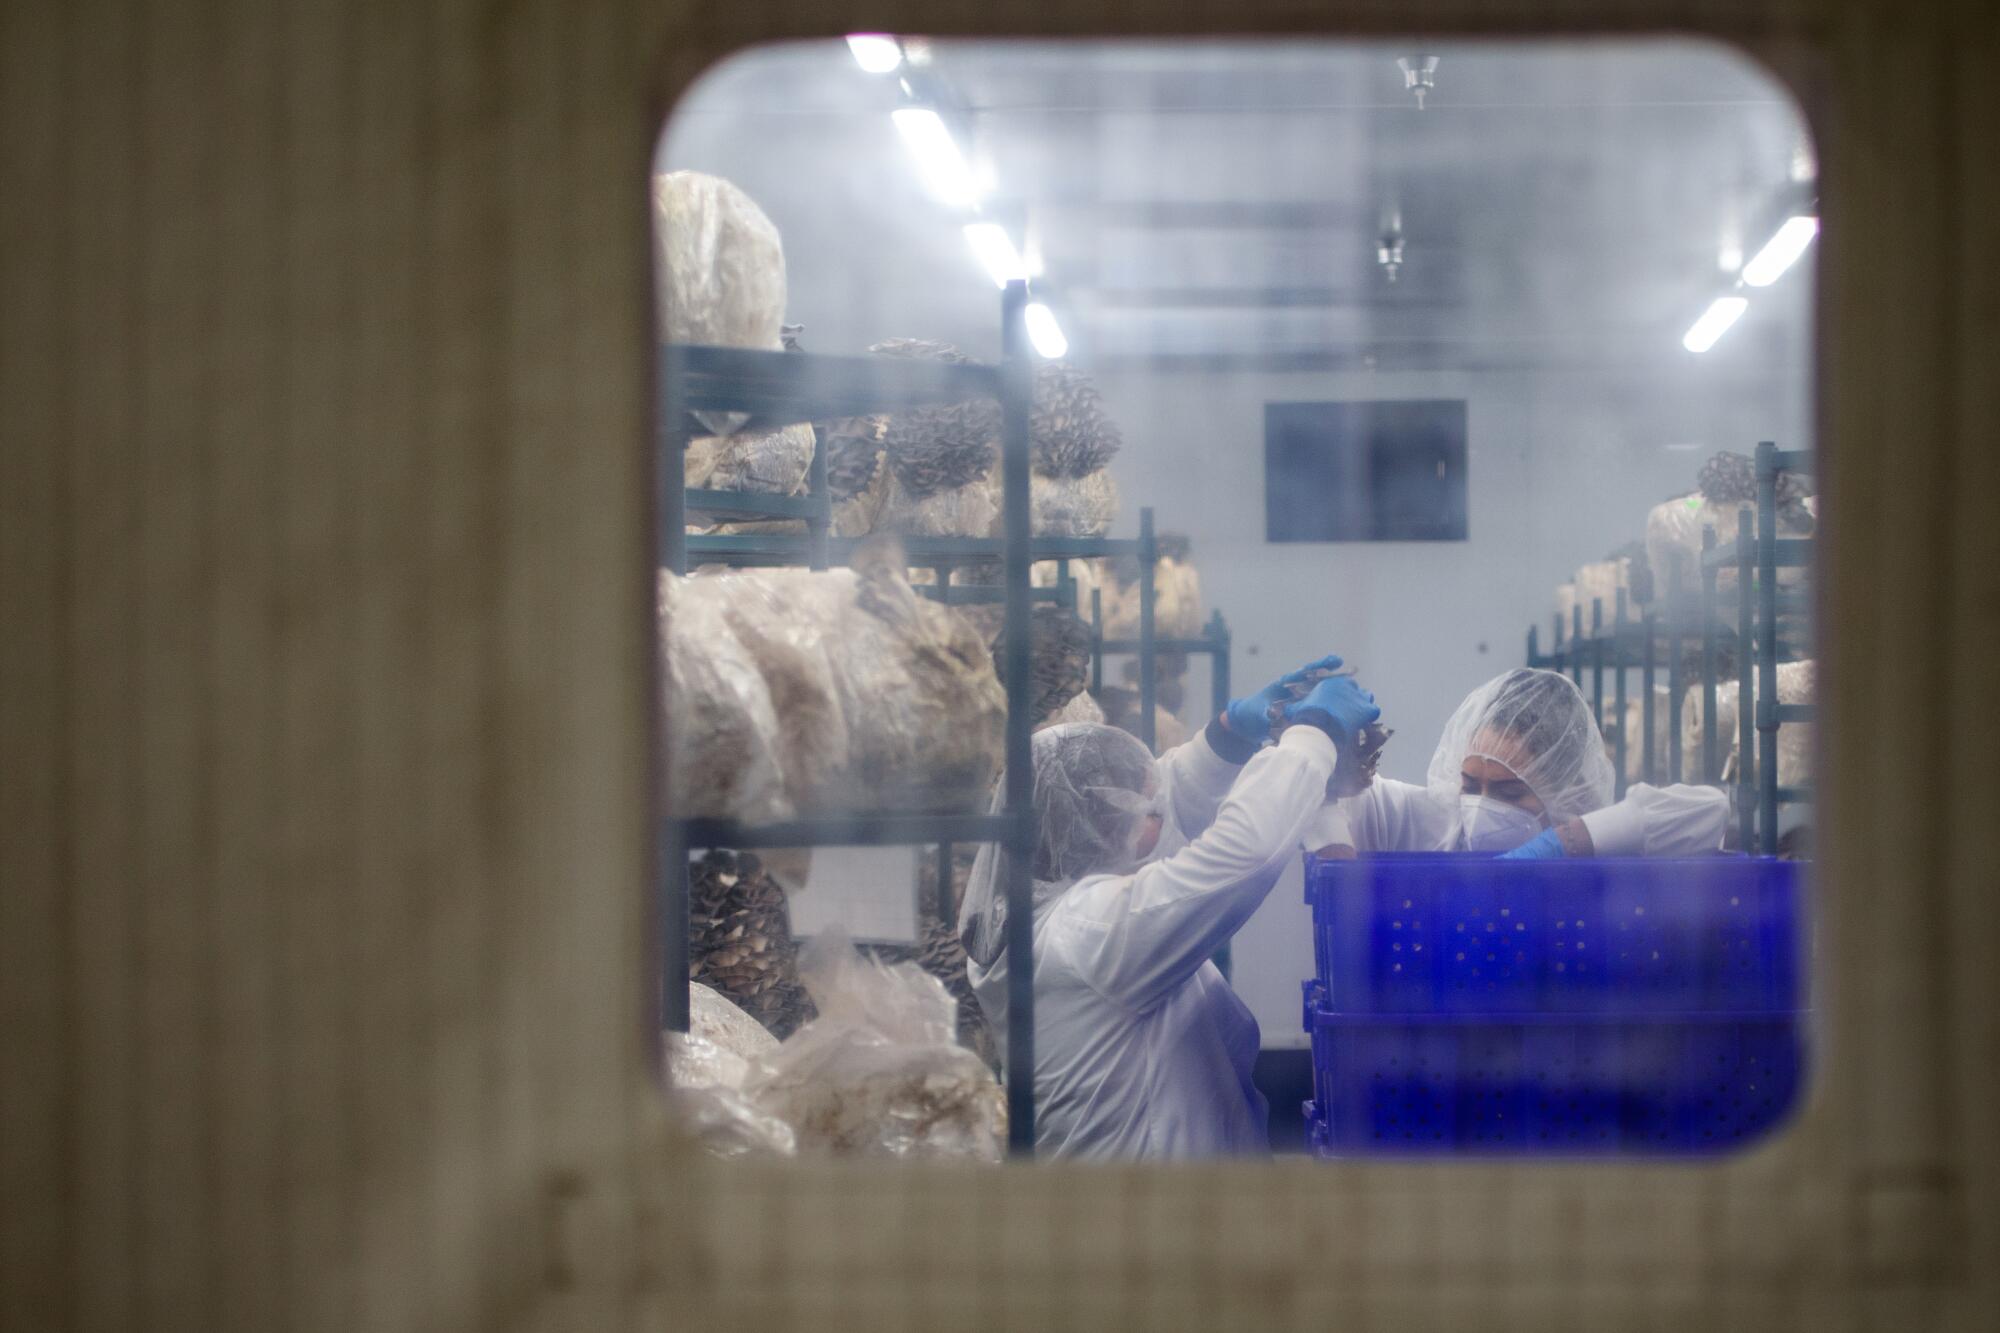 A person in a lab coat harvesting mushrooms in a lab, seen through the glass window in a closed door.